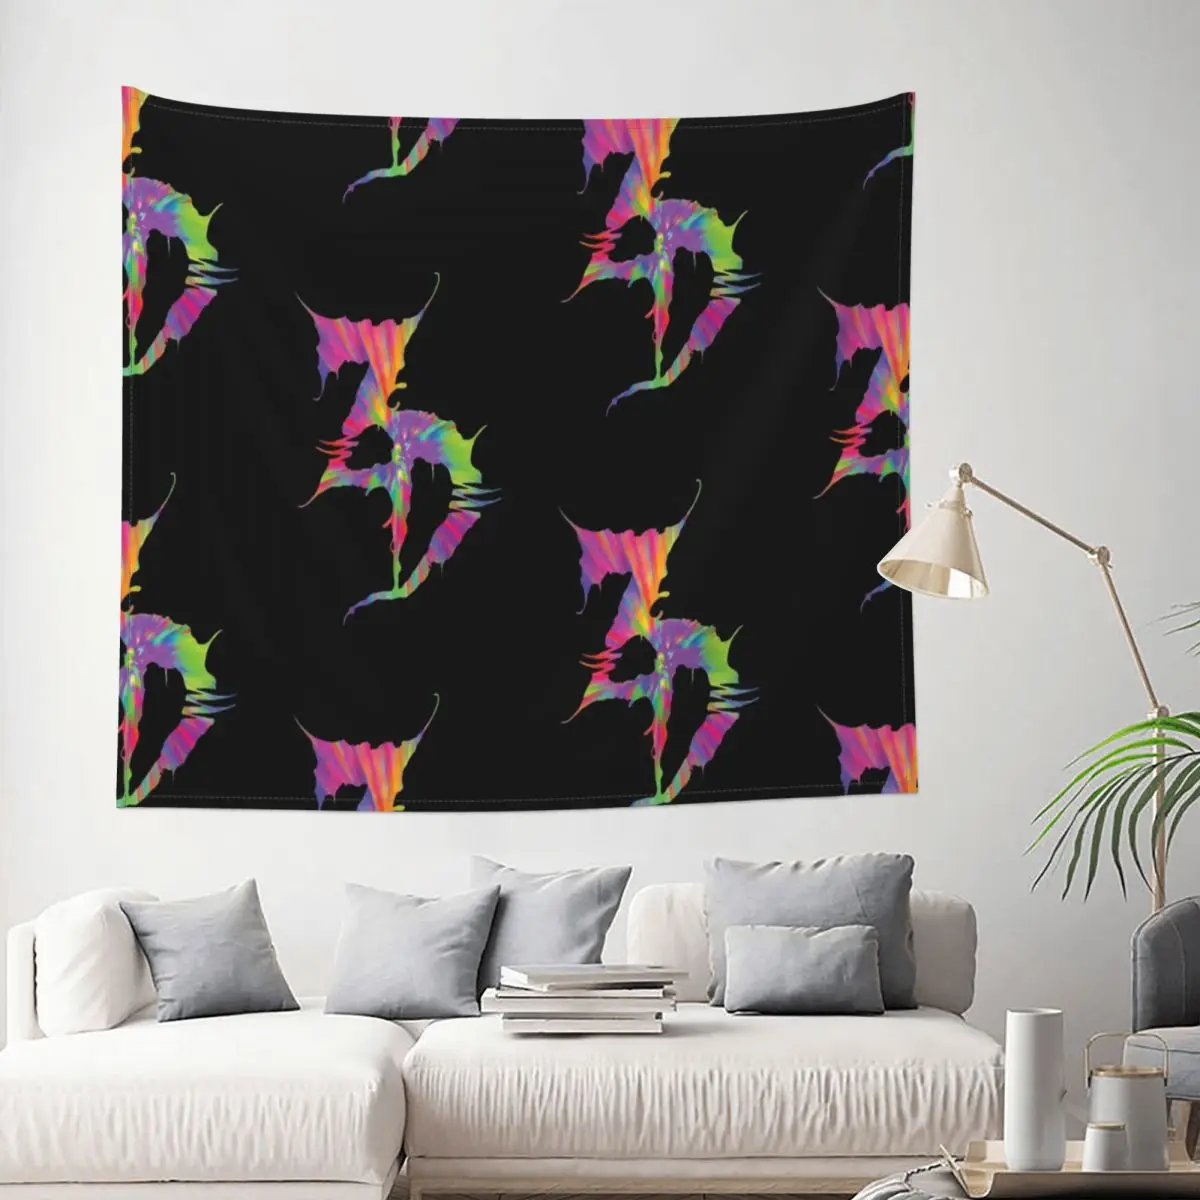 

Zeds Dead Tapestry Psychedelic Trippy Colorful Abstract Decoration Wall Room Home Decor Hanging Bedroom Kawaii Pattern Style